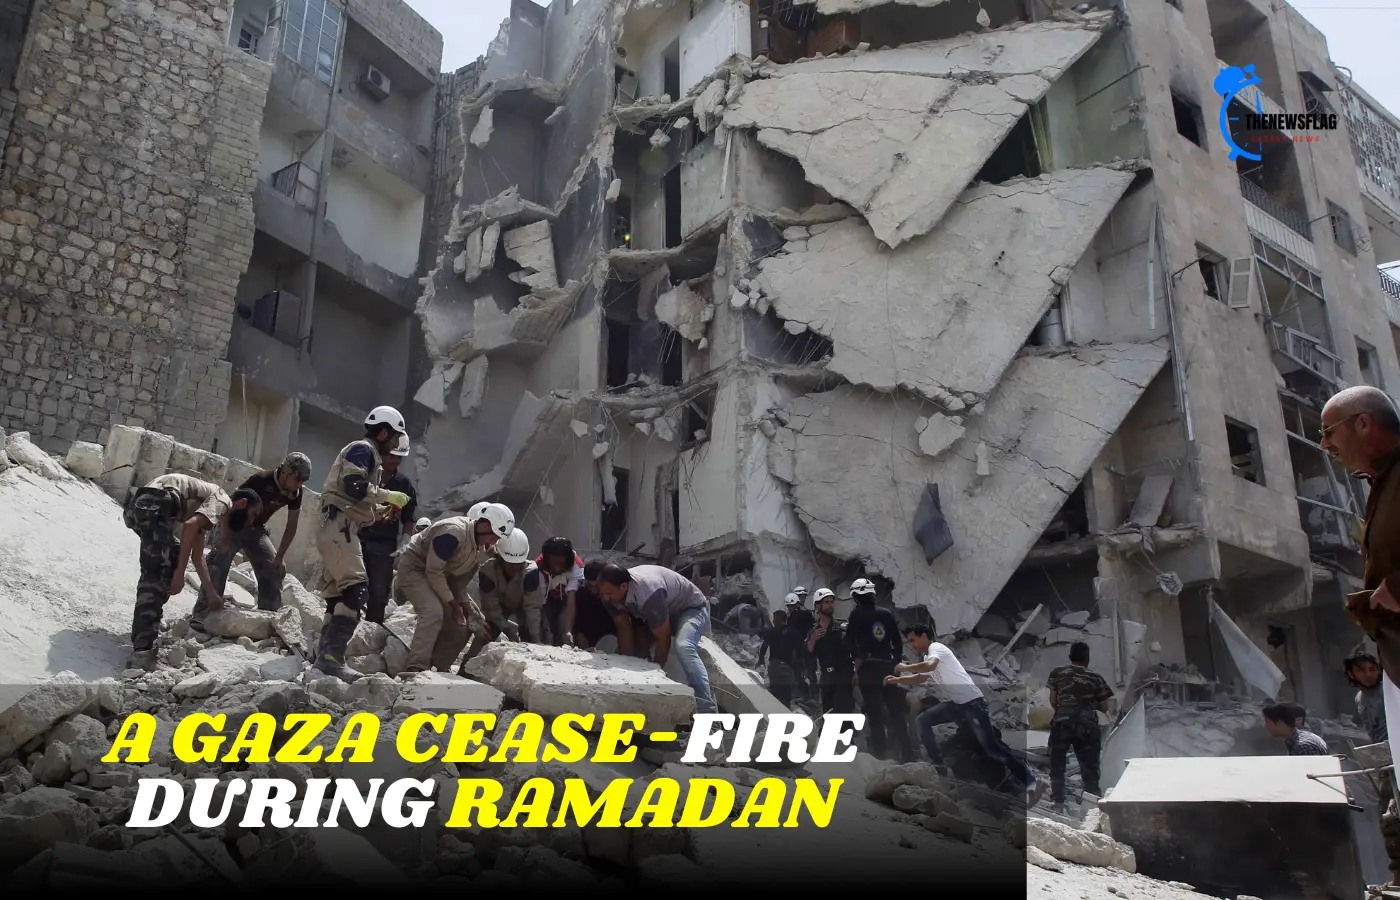 The UN will vote on a resolution calling for a Gaza cease-fire during Ramadan.